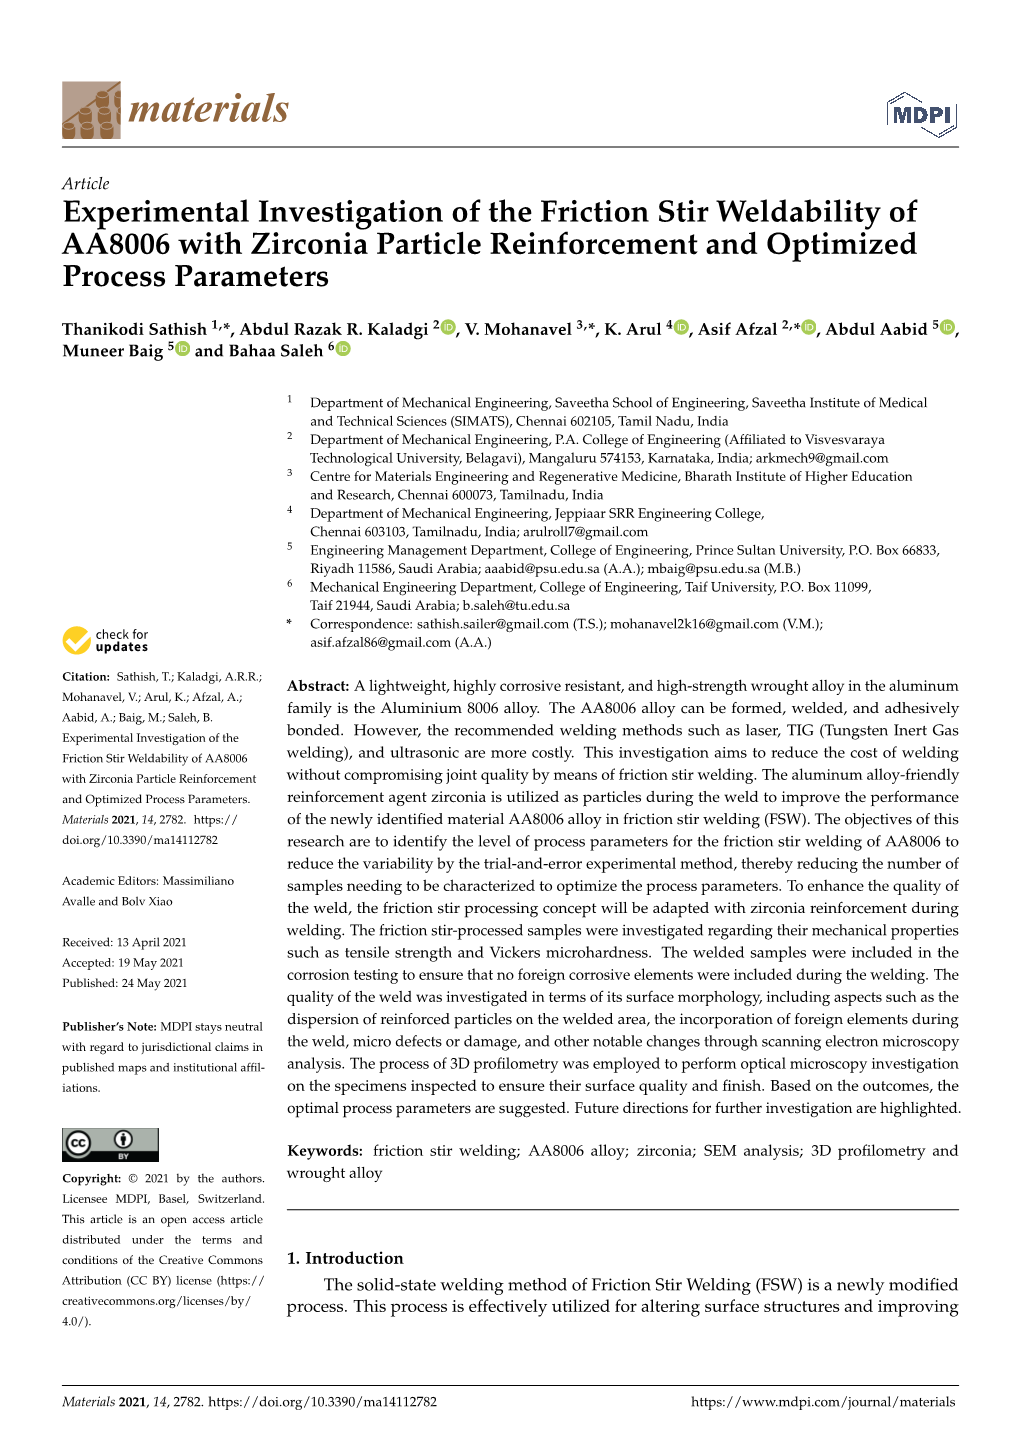 Experimental Investigation of the Friction Stir Weldability of AA8006 with Zirconia Particle Reinforcement and Optimized Process Parameters